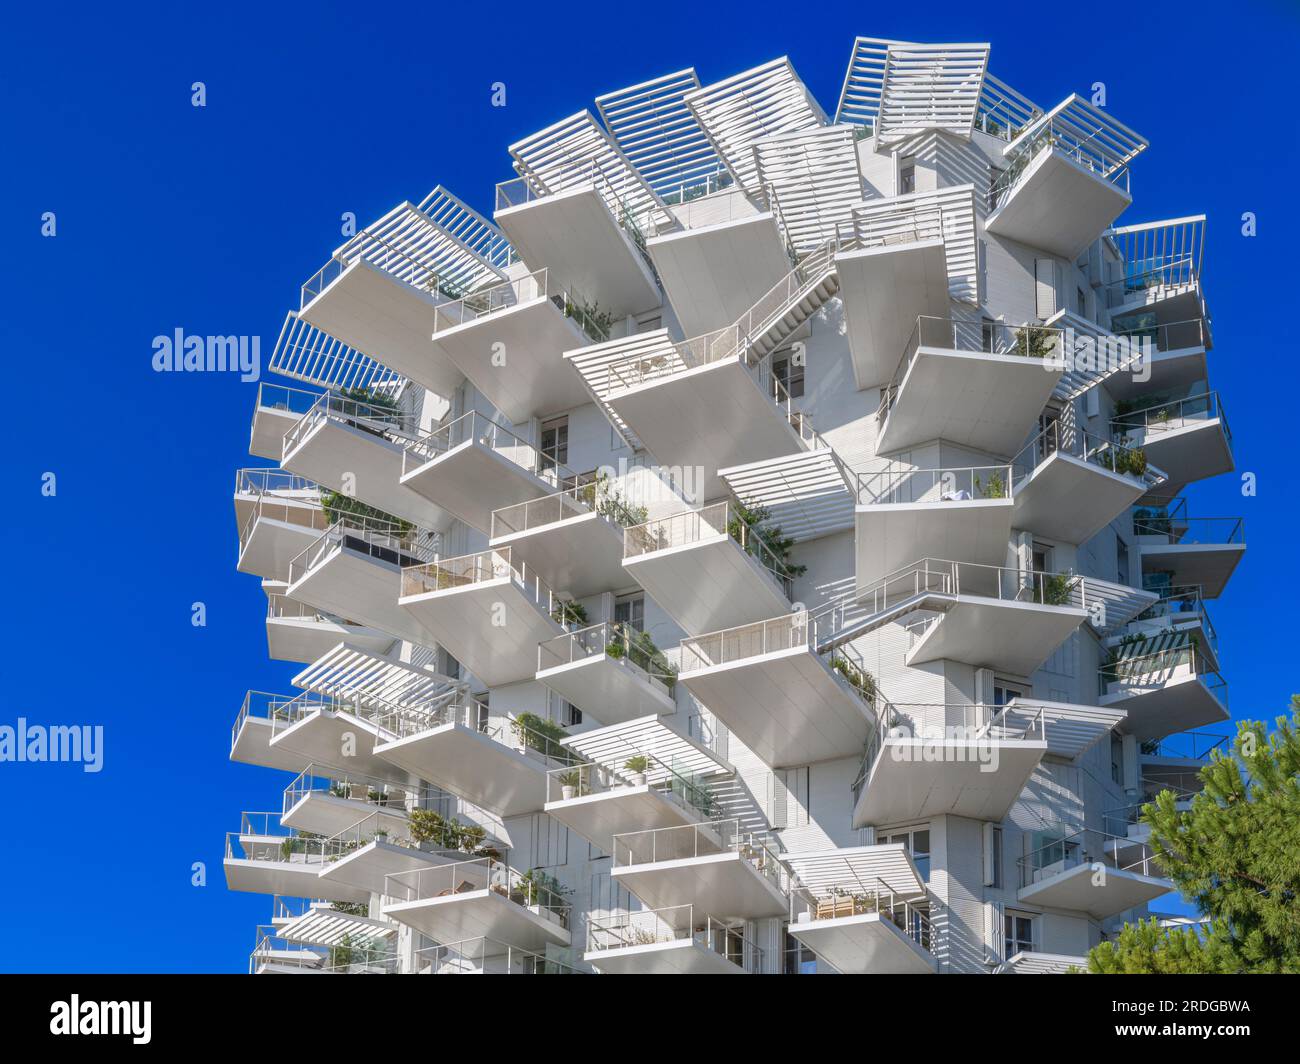 L'Arbre Blanc - White Tree - in Montpellier. Modelled on a tree, the curved 17-storey building contains 113 apartments with cantilevering balconies. Stock Photo